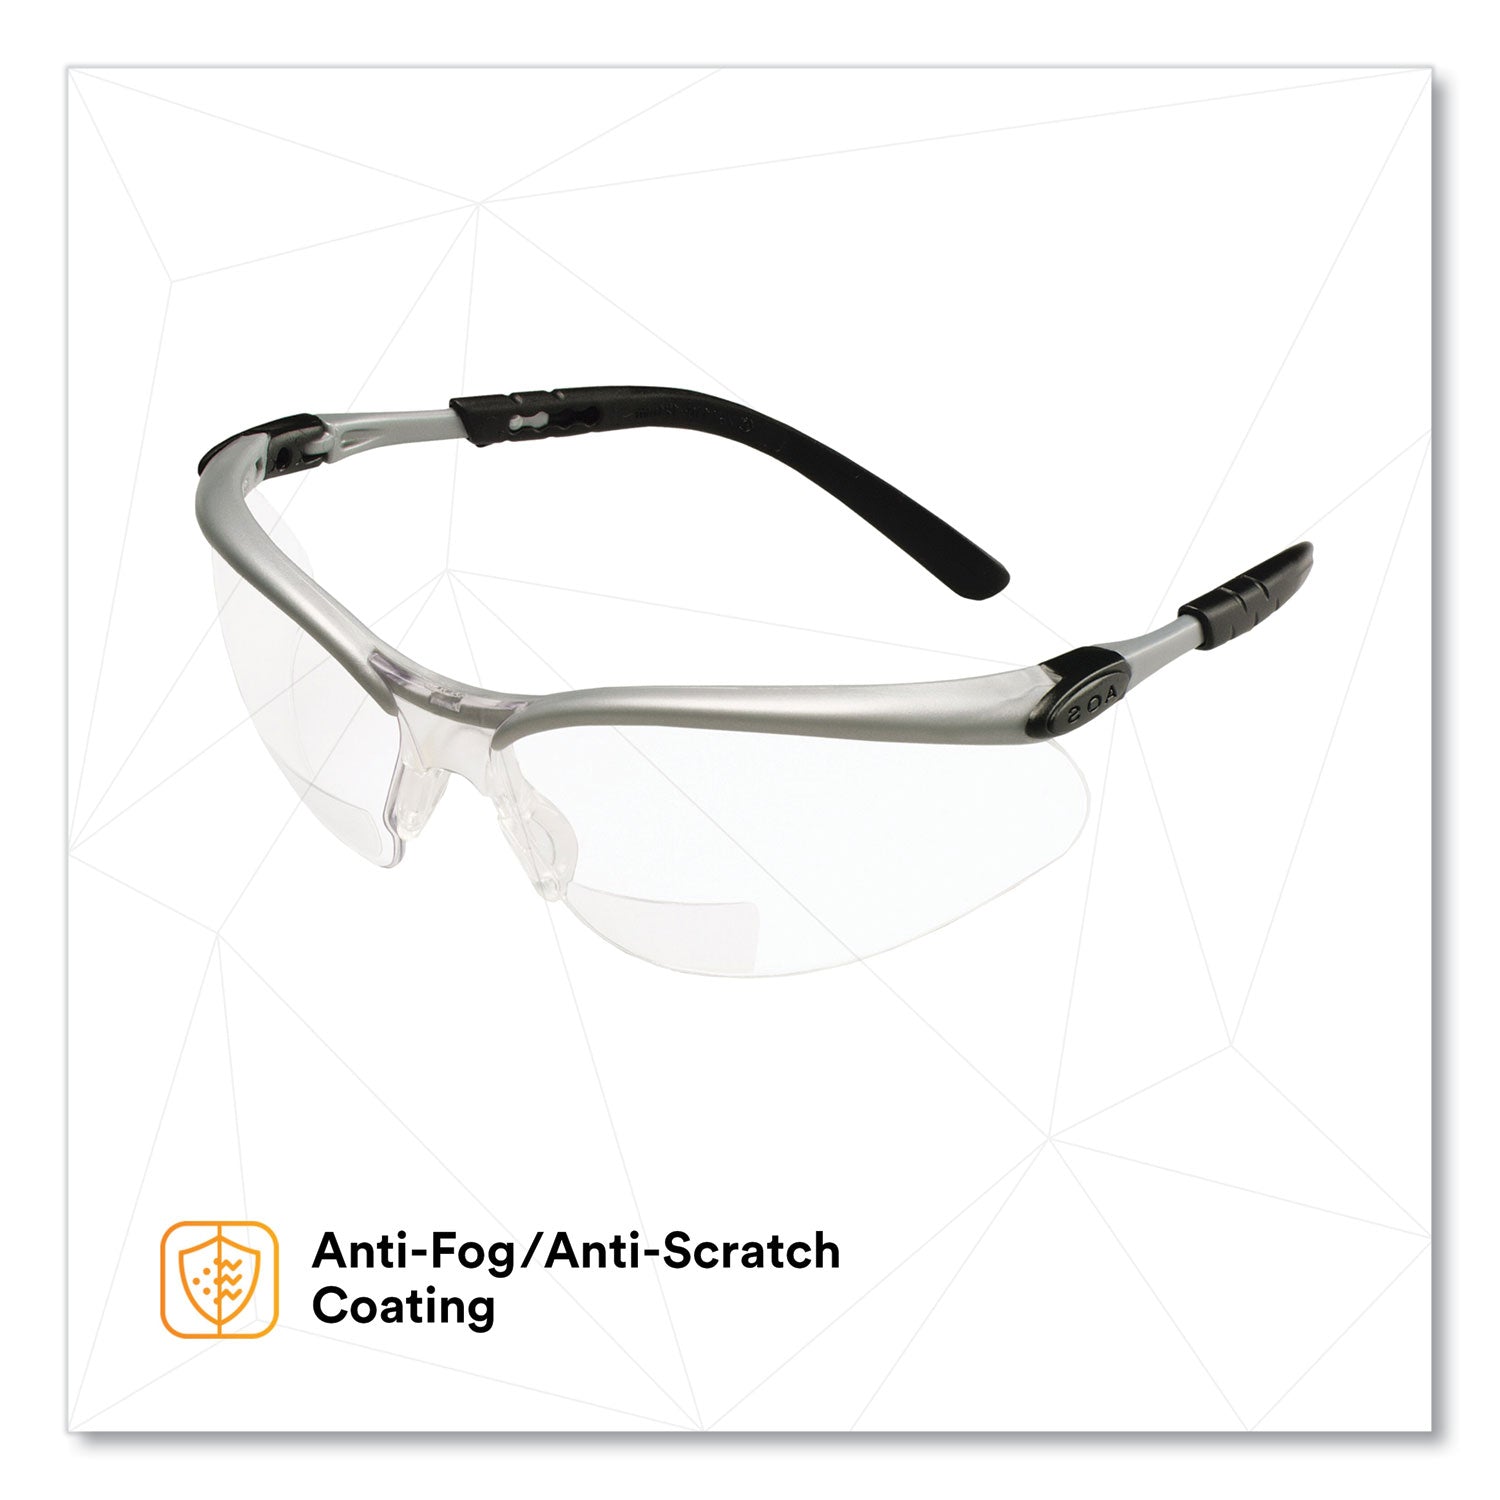 bx-molded-in-diopter-safety-glasses-25+-diopter-strength-silver-black-frame-clear-lens_mmm1137600000 - 3